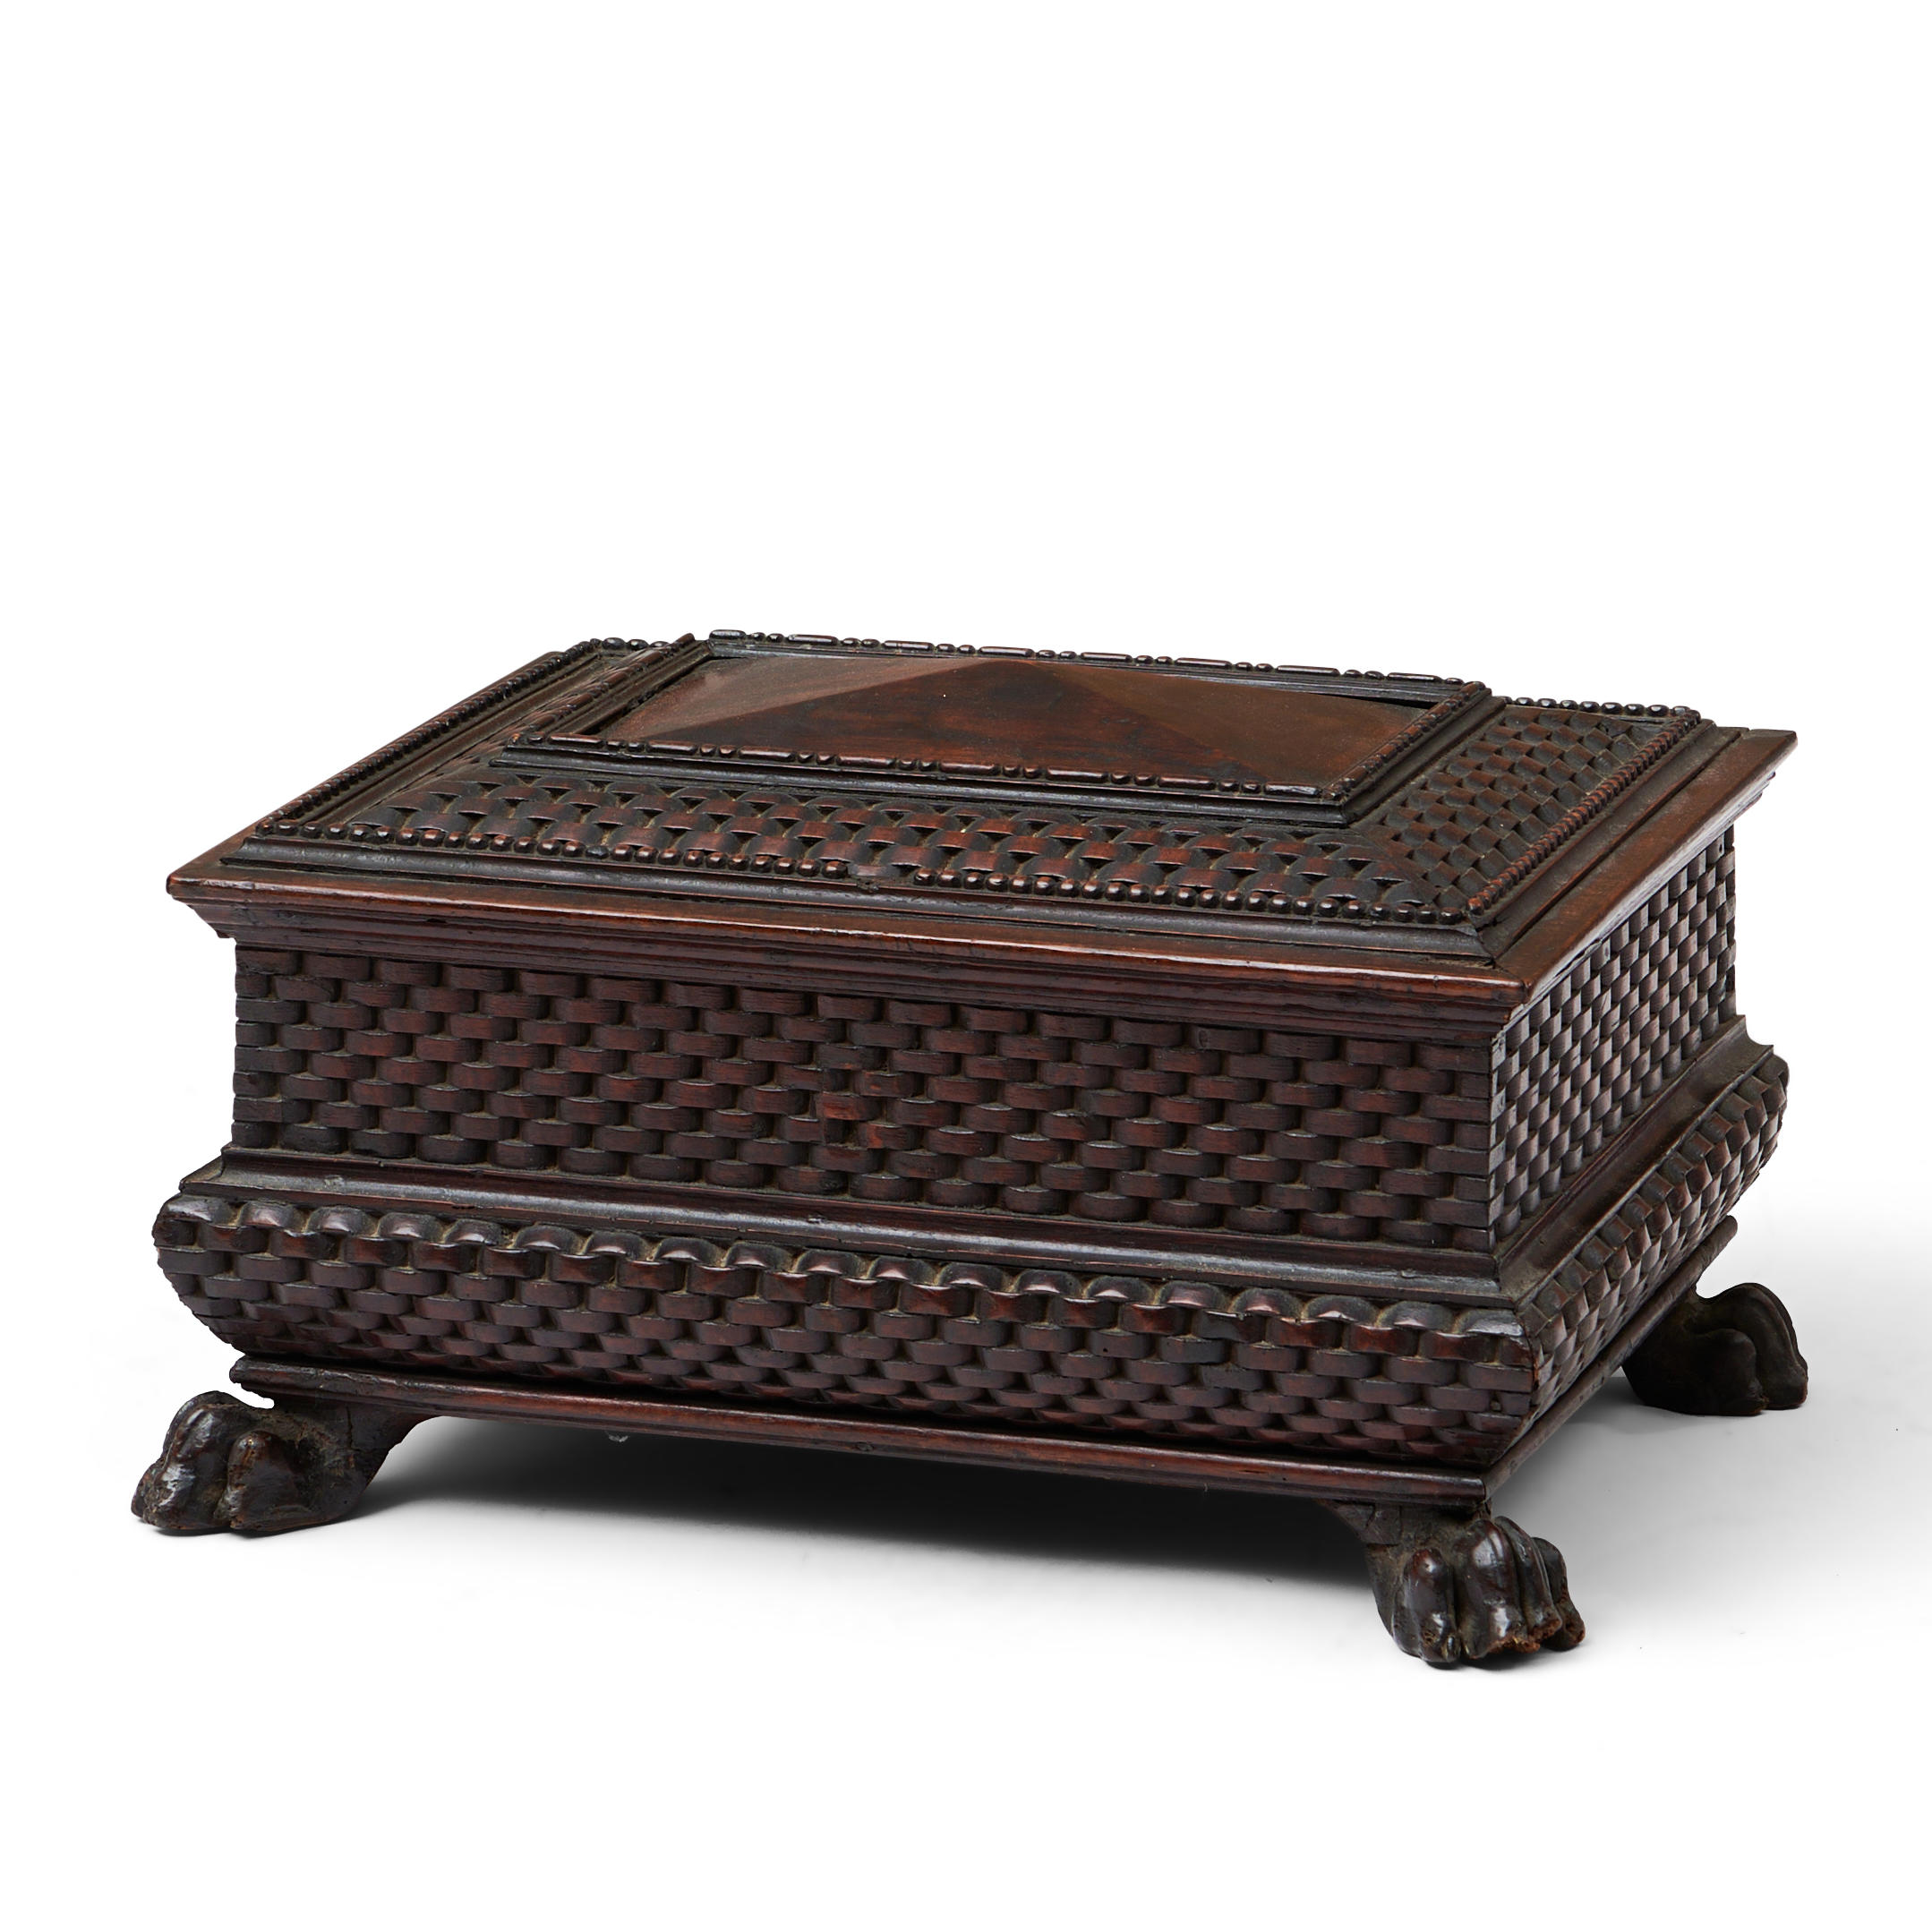 CARVED FRUITWOOD CHEST, rectangular